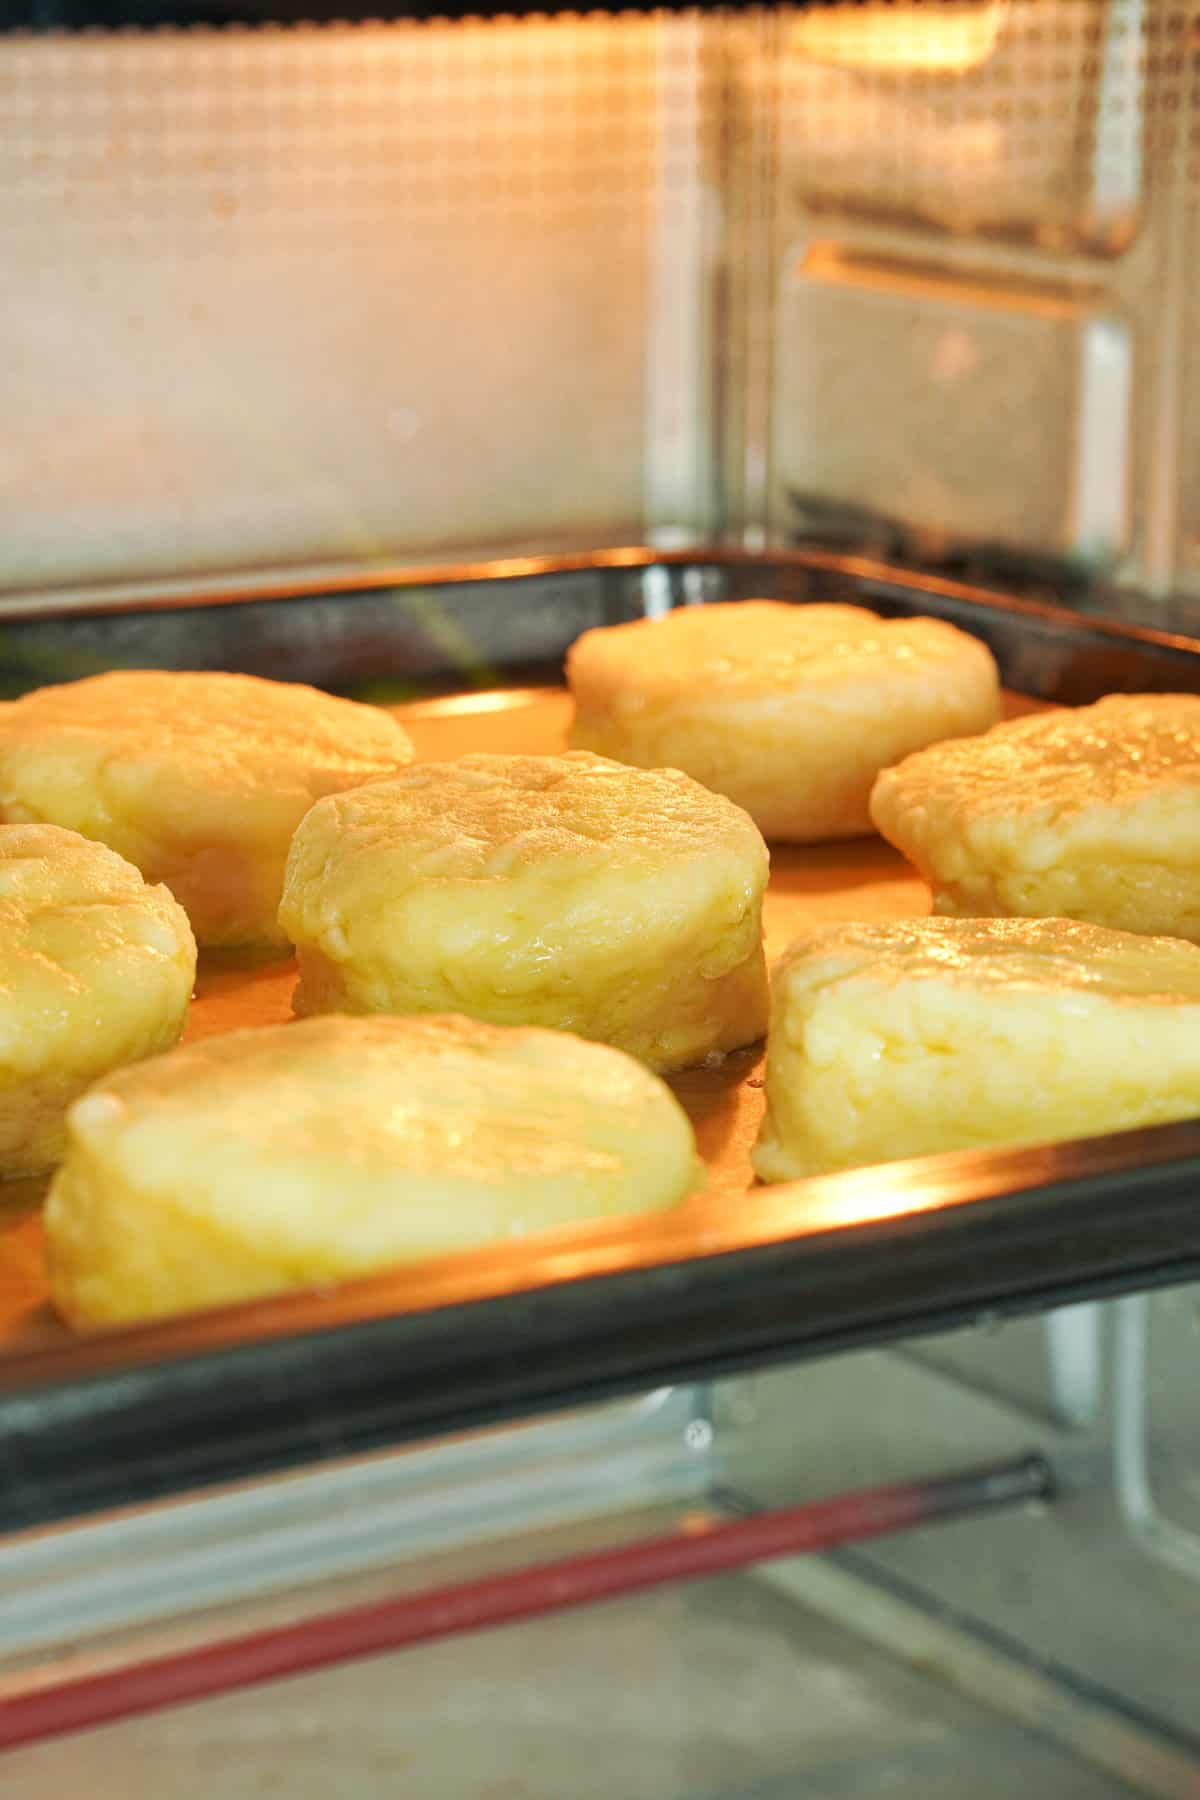 Side angle view showing biscuits on cookie sheet inside the oven, baking.